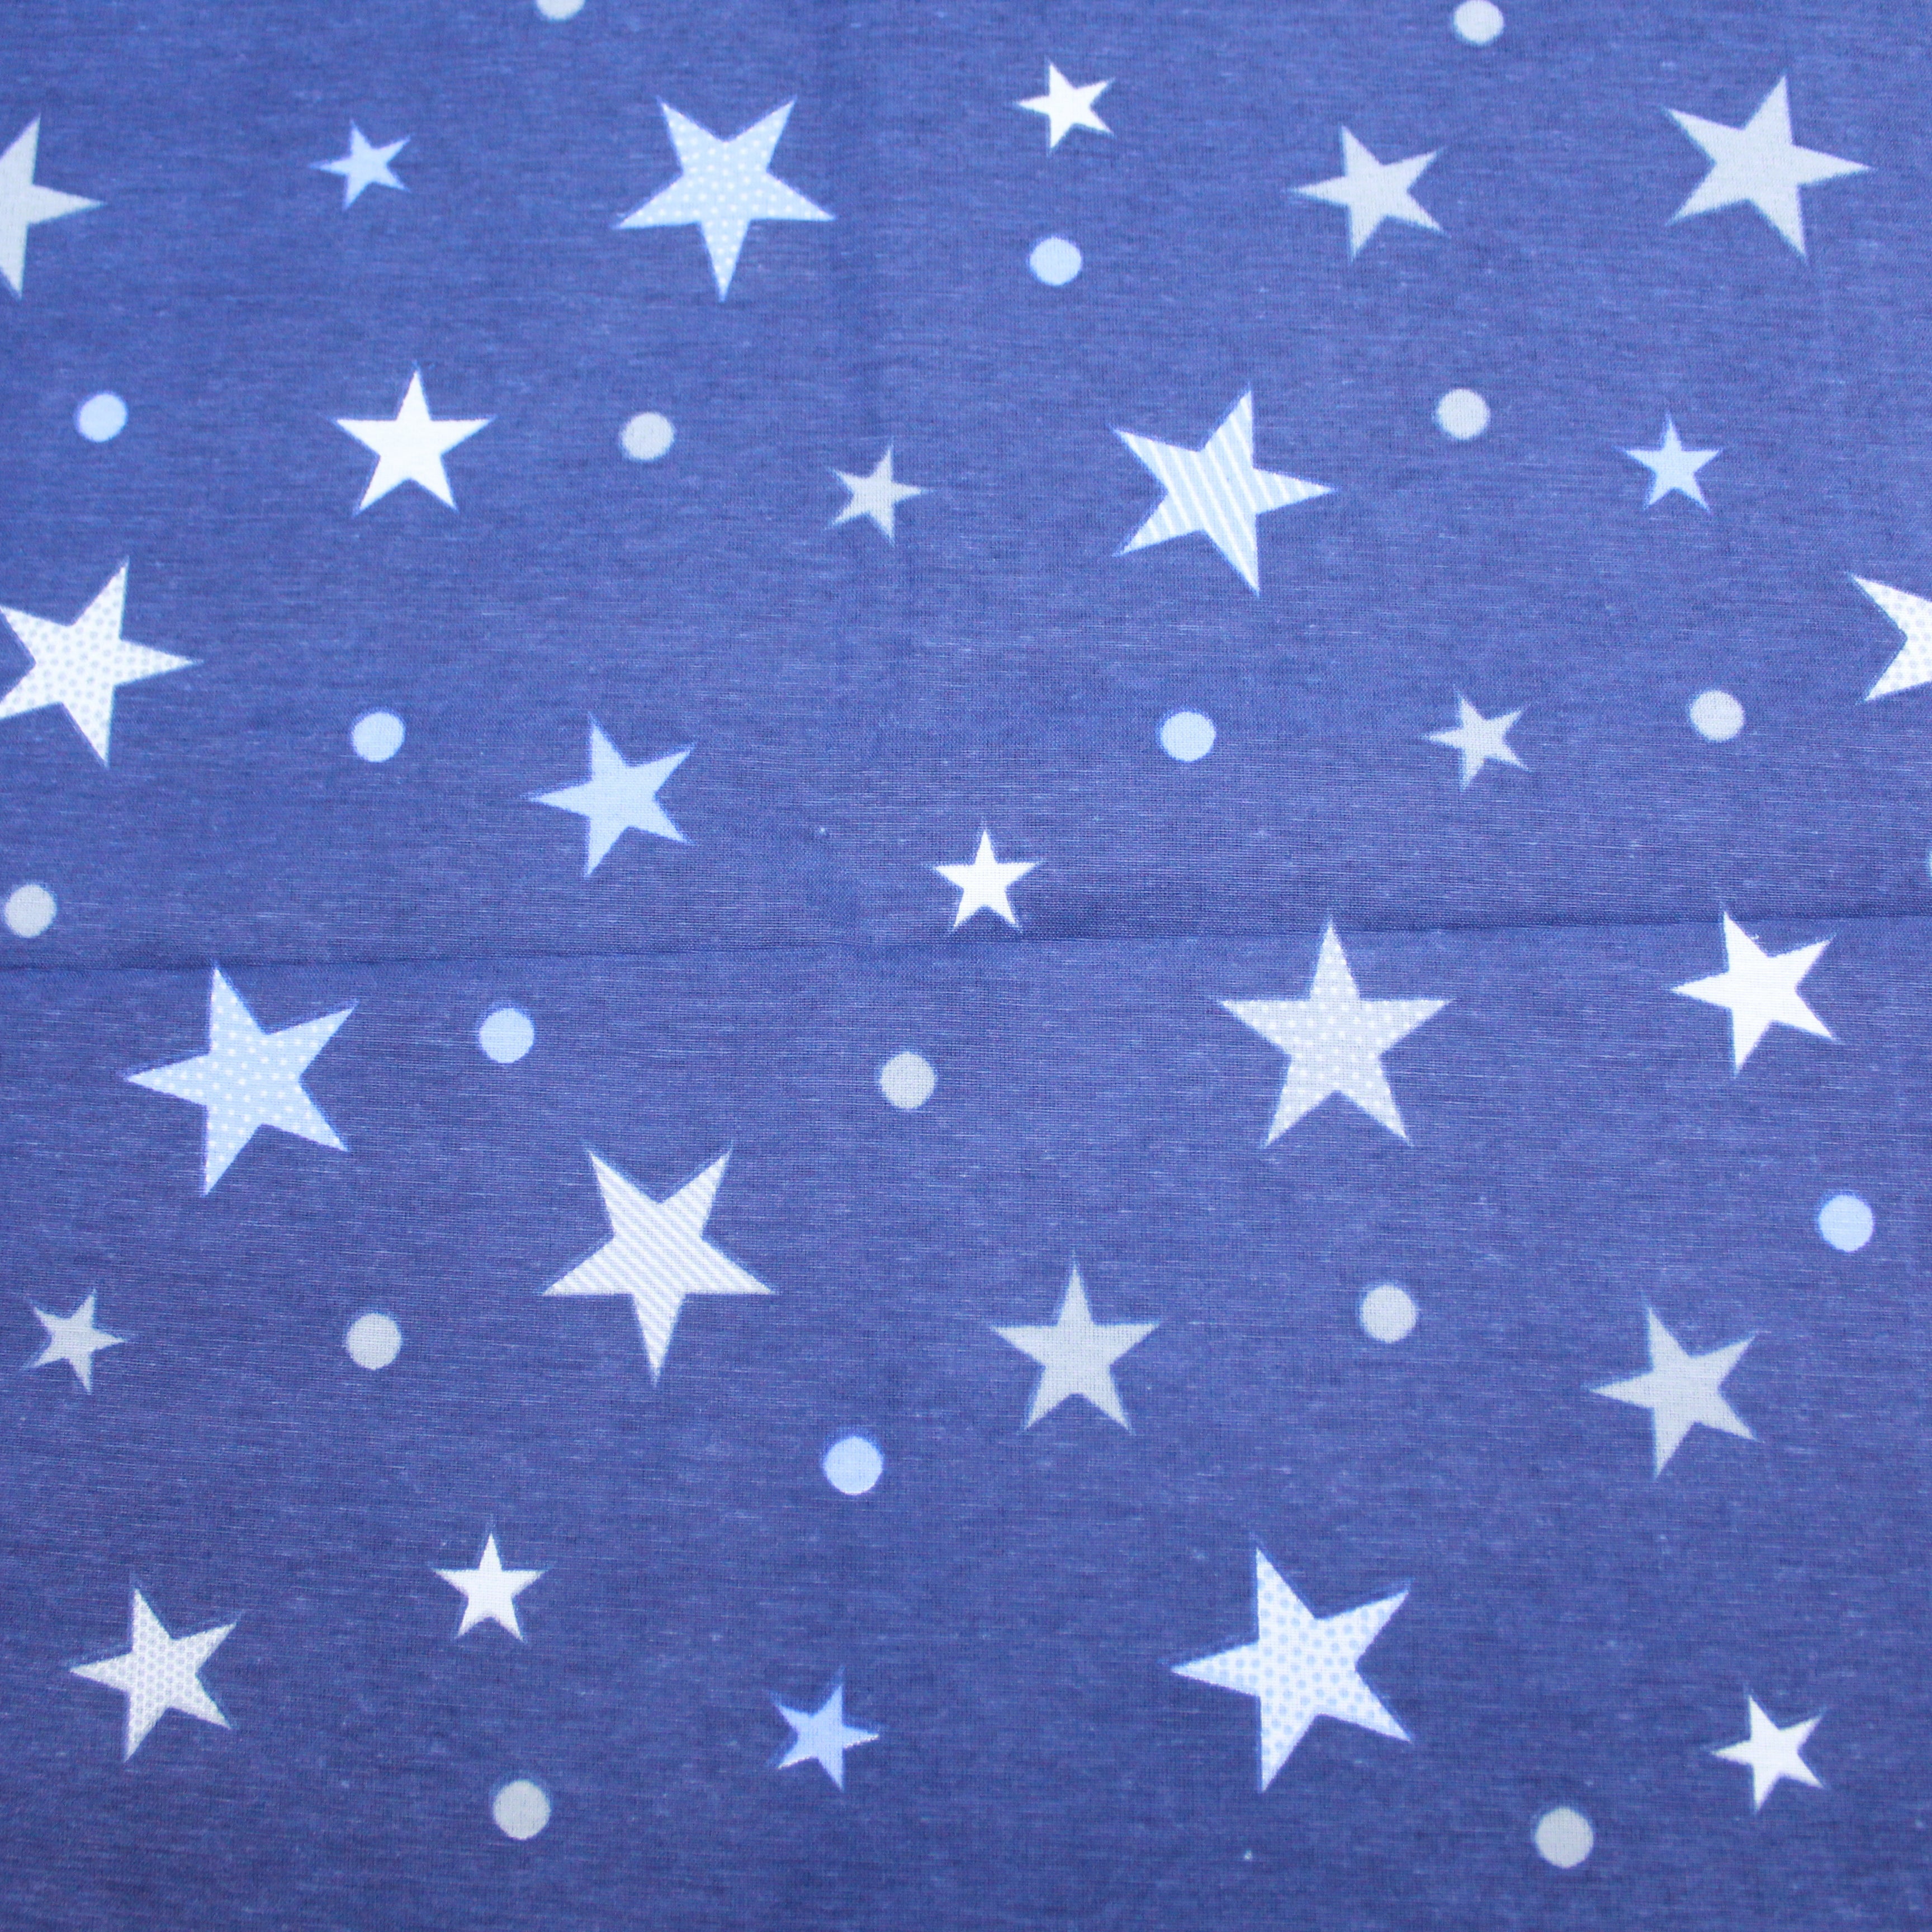 Premium Quality Super Wide Cotton Blend Sheeting "Navy Stars & Polka Dots" 94" Wide Navy